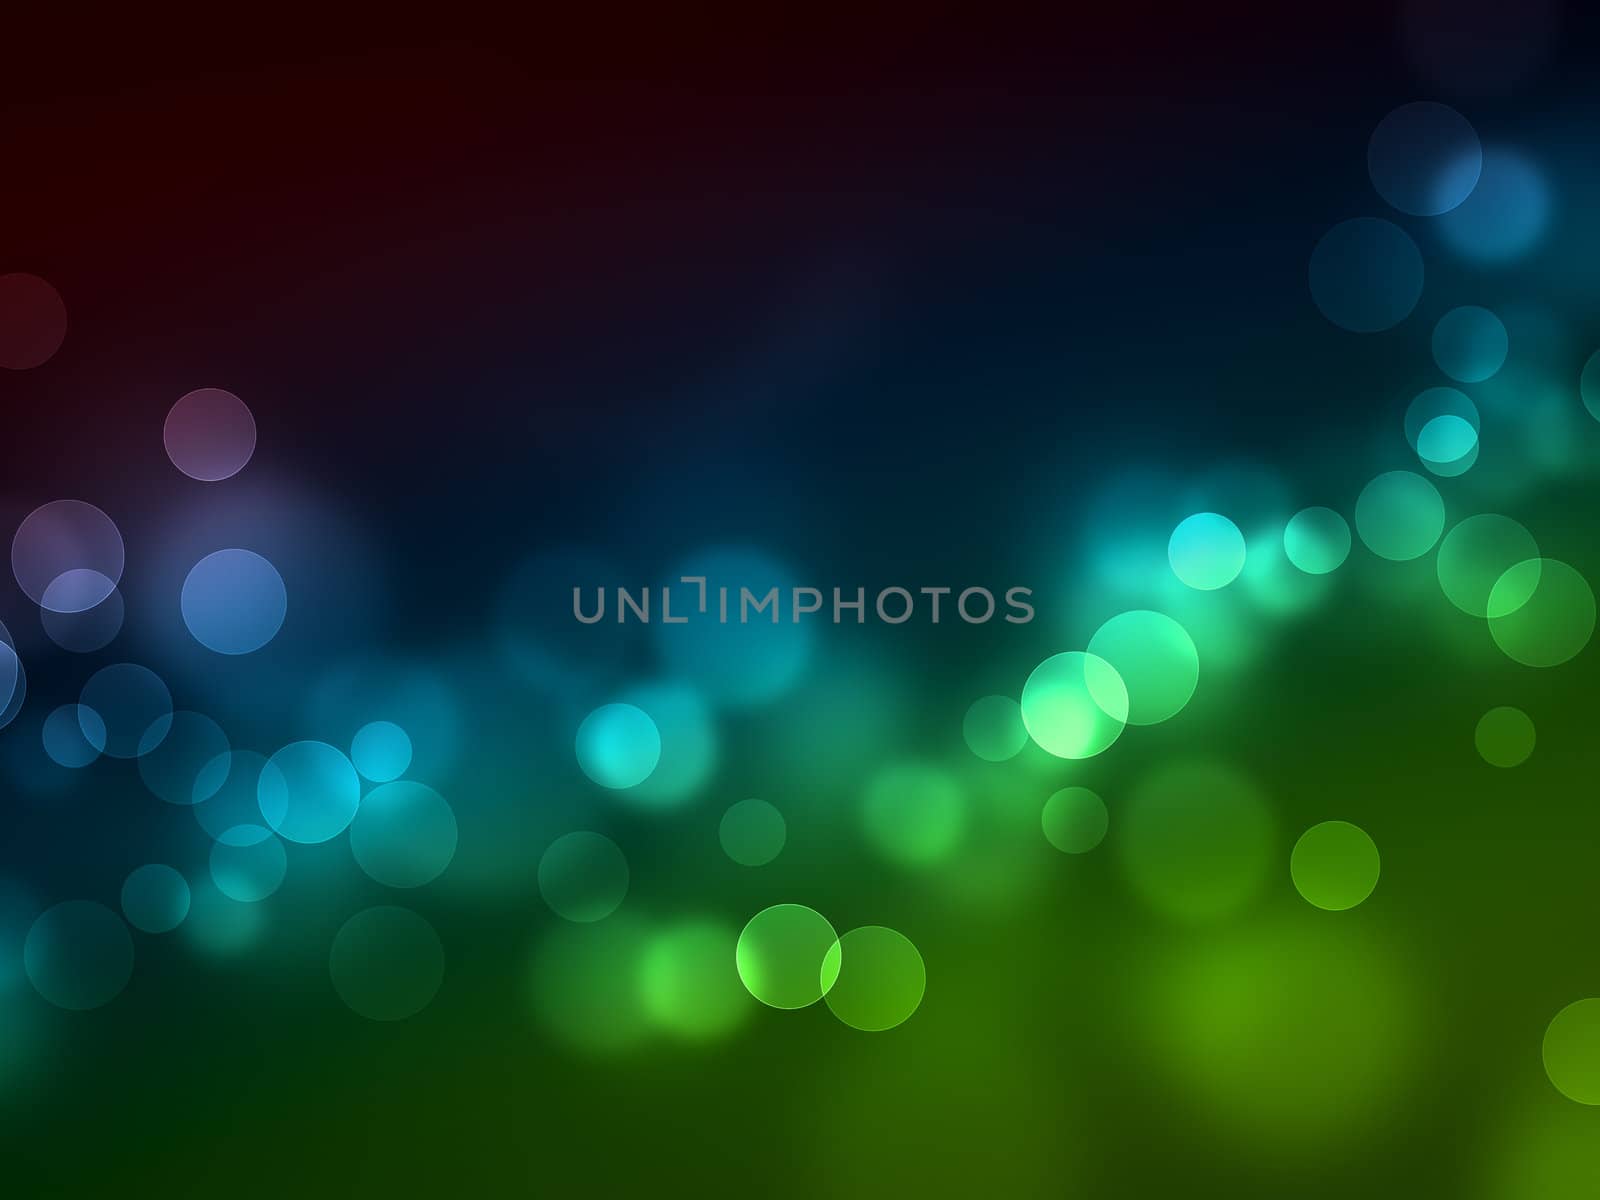 An image of a nice lights background